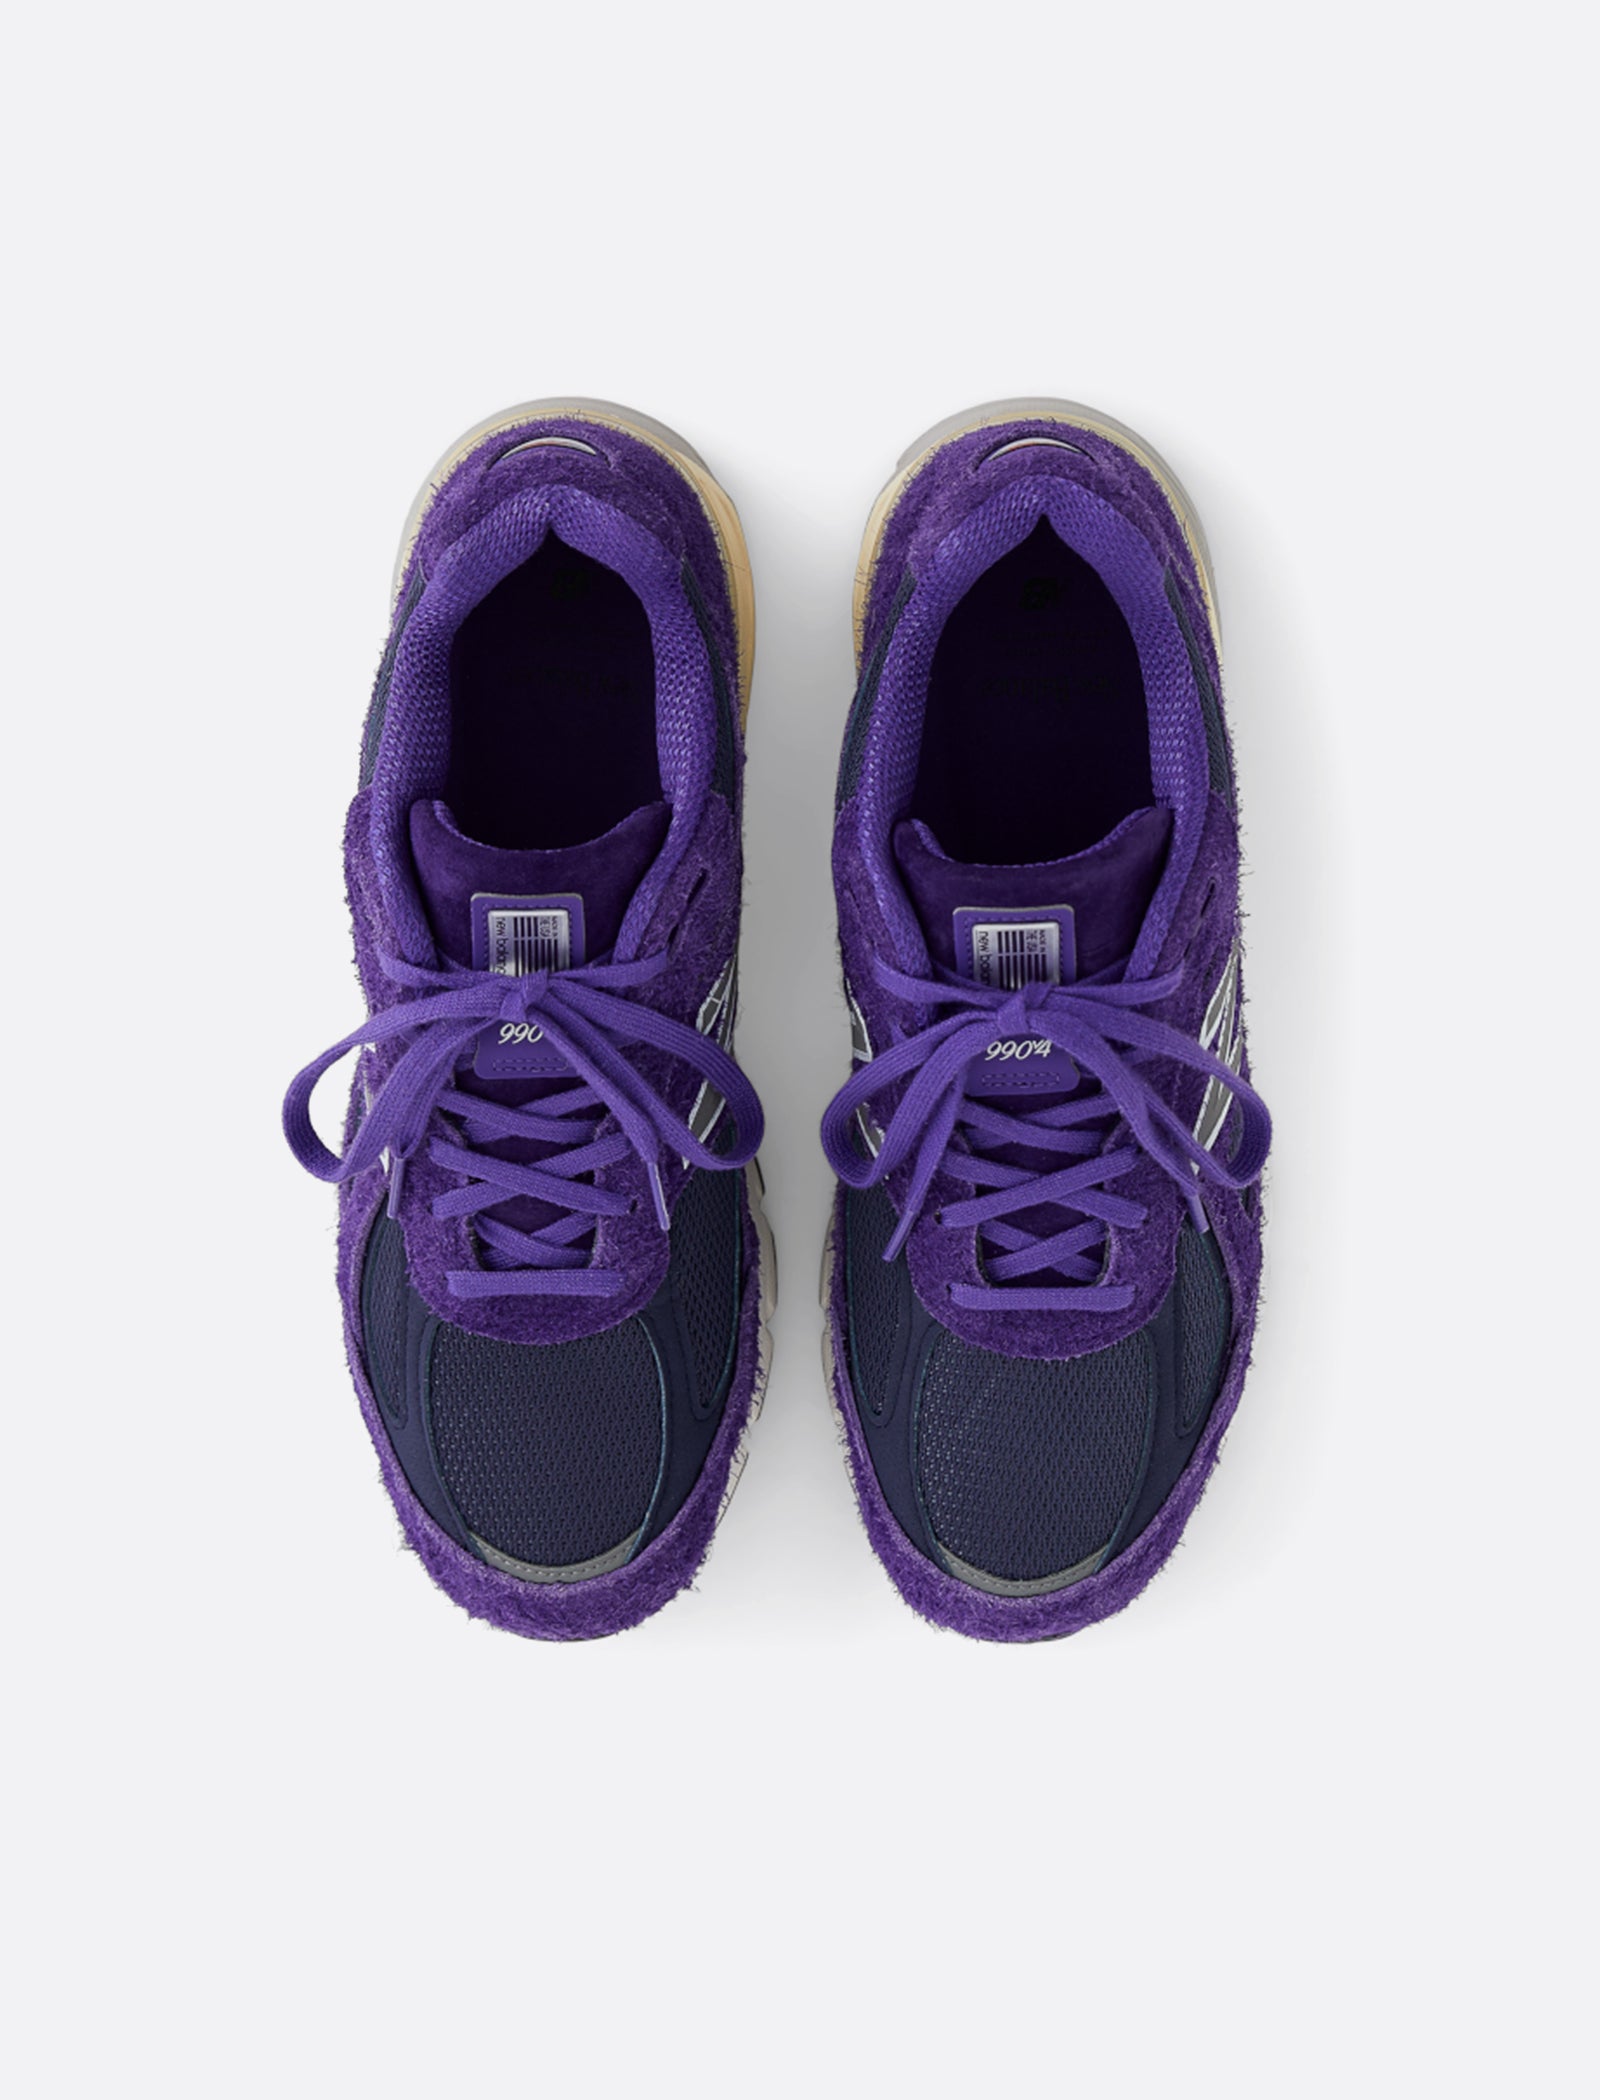 990 v4 MADE IN USA "PURPLE SUEDE"